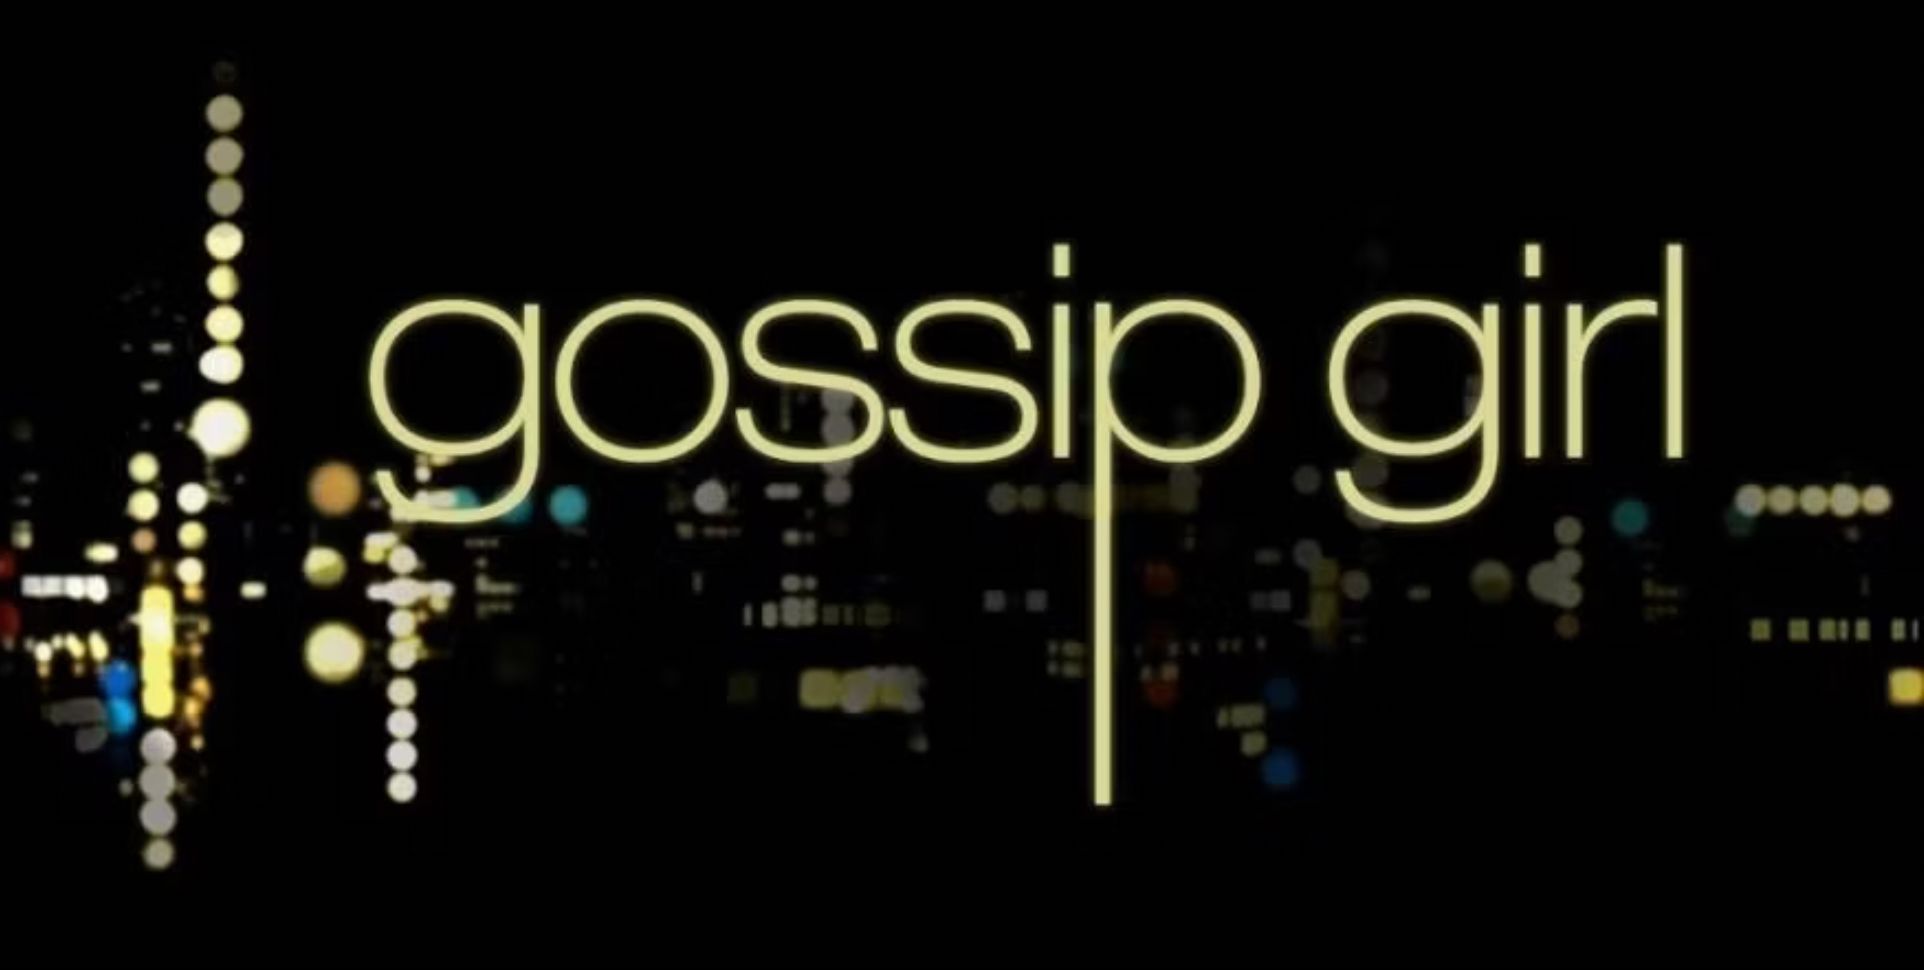 The Gossip Girl TV series title card features the name of the show over the city skyline